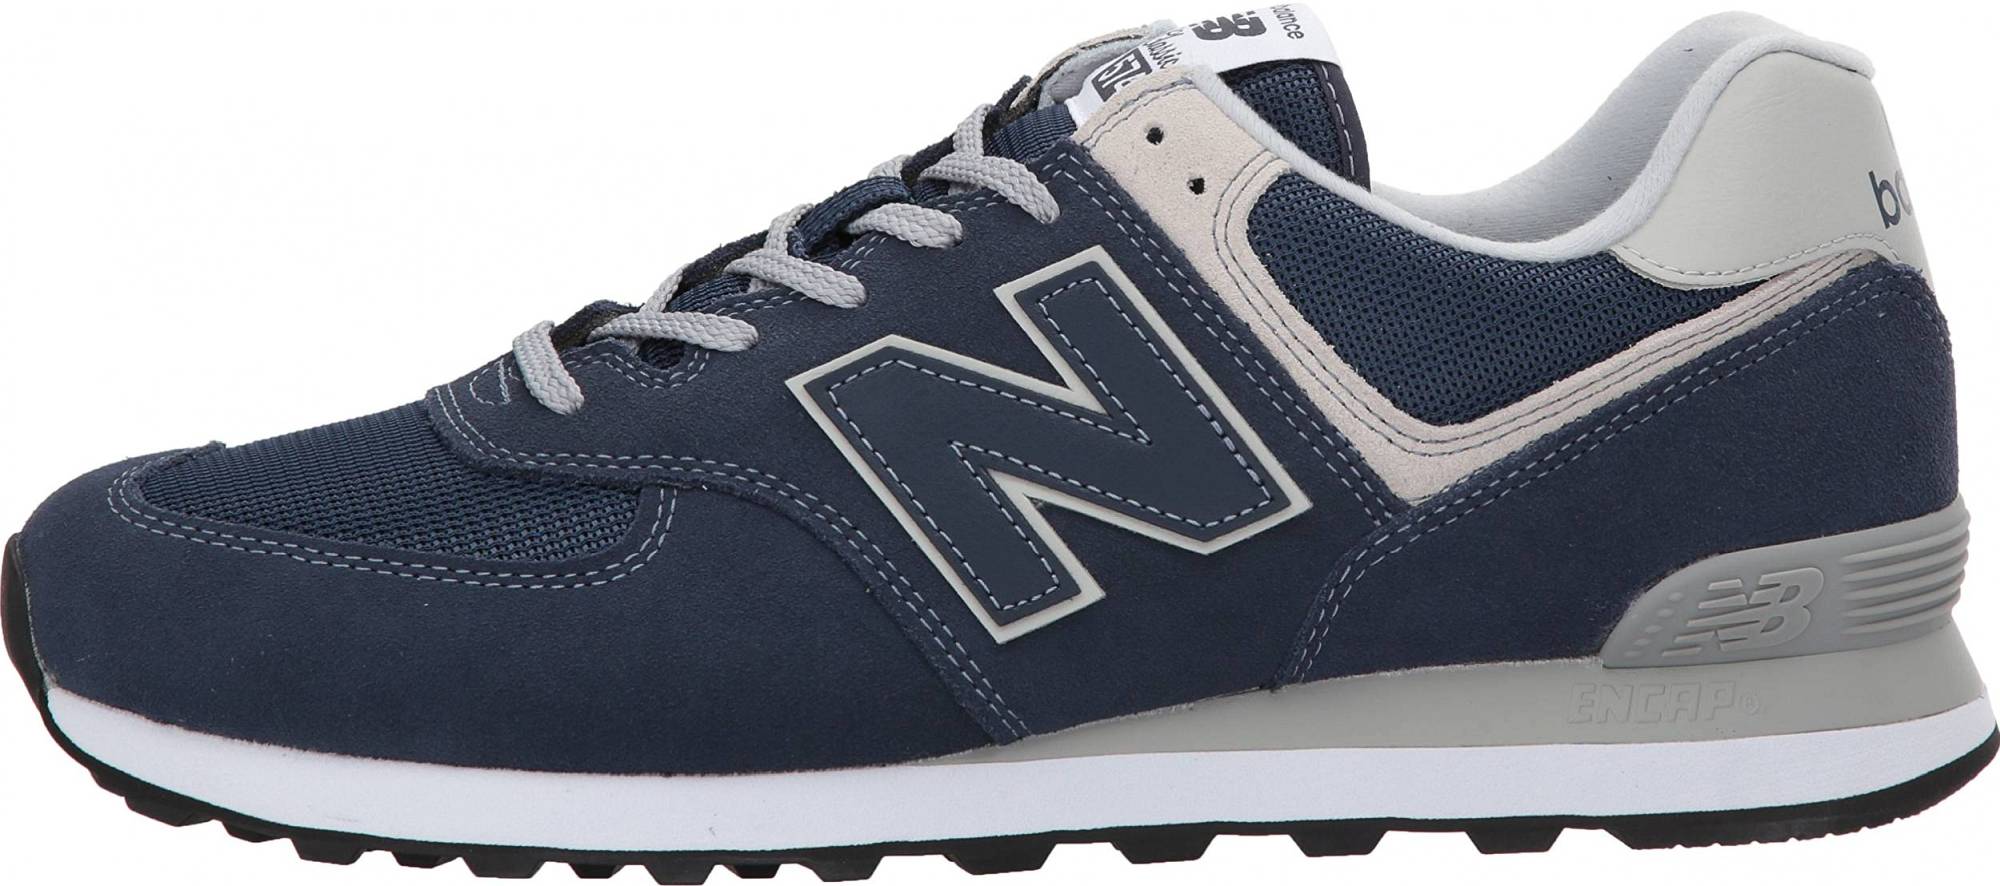 New Balance 574 Core – Shoes Reviews & Reasons To Buy